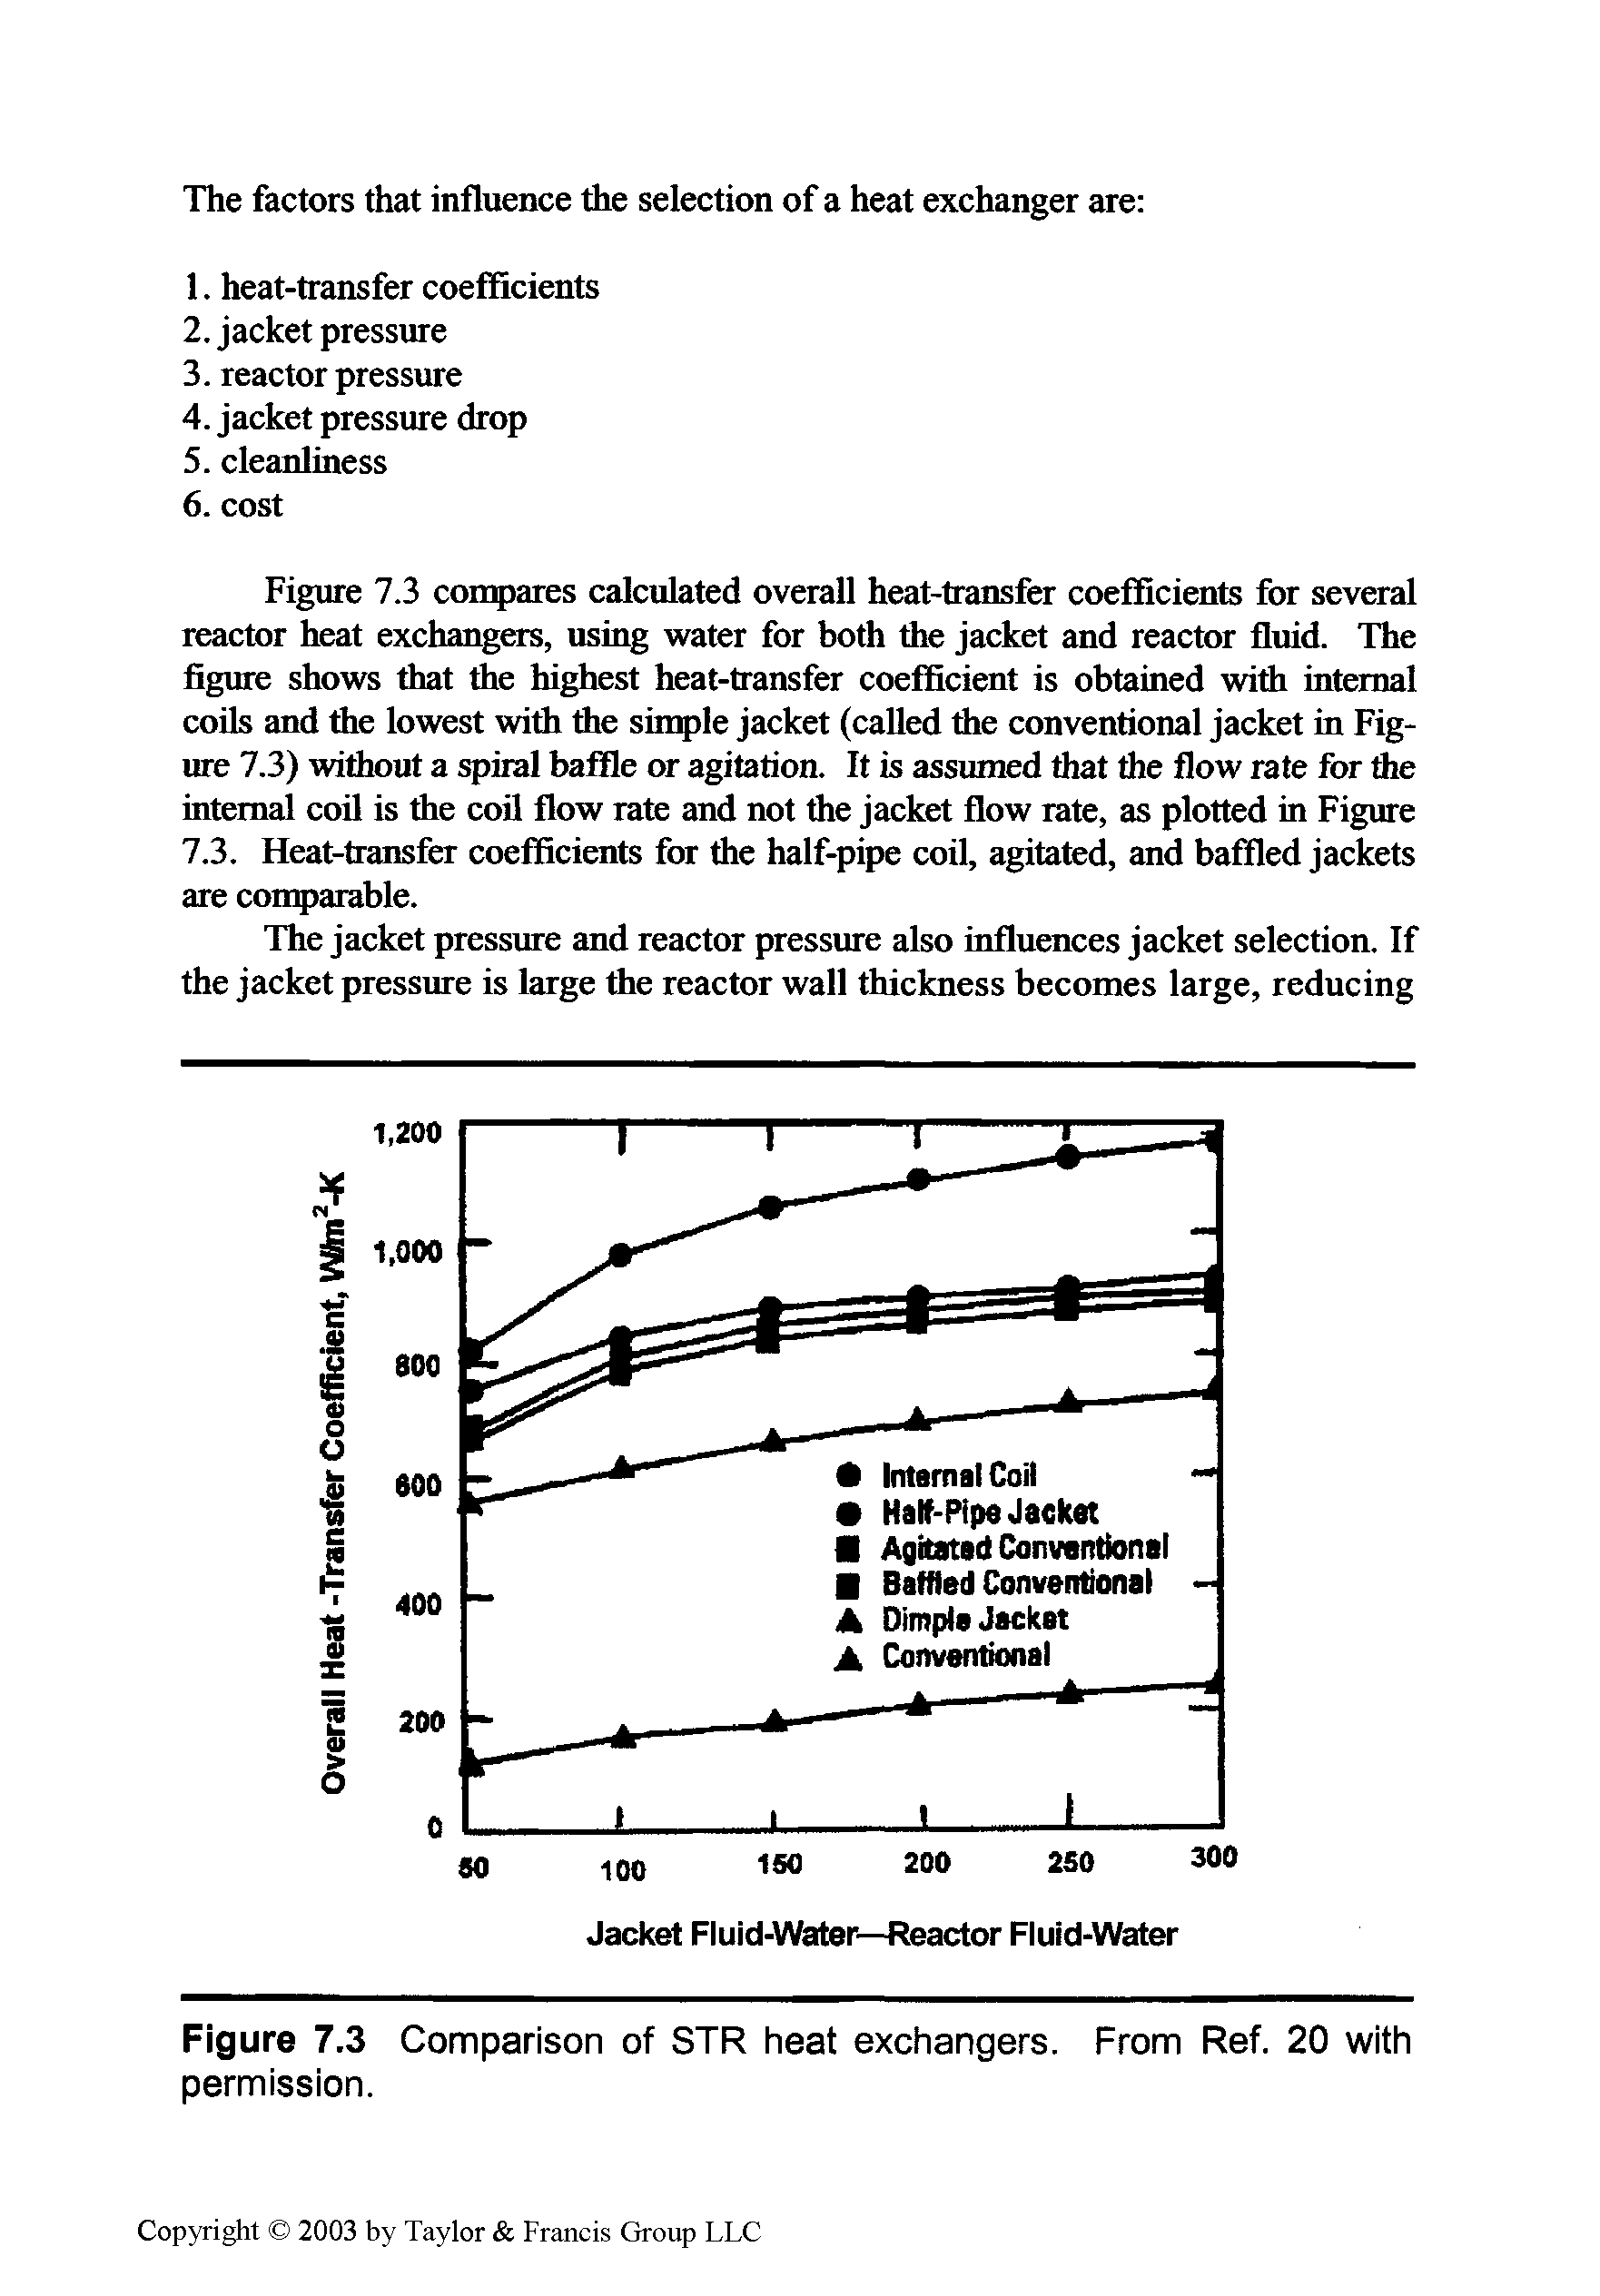 Figure 7.3 compares calculated overall heat-transfer coefficients for several reactor heat exchangers, using water for both the jacket and reactor fluid. The figure shows that the highest heat-transfer coefficient is obtained with internal coils and the lowest with the simple jacket (called the conventional jacket in Figure 7.3) without a spiral baffle or agitation. It is assumed that the flow rate for the internal coil is the coil flow rate and not the jacket flow rate, as plotted in Figure 7.3. Heat-transfer coefficients for the half-pipe coil, agitated, and baffled jackets are conparable.